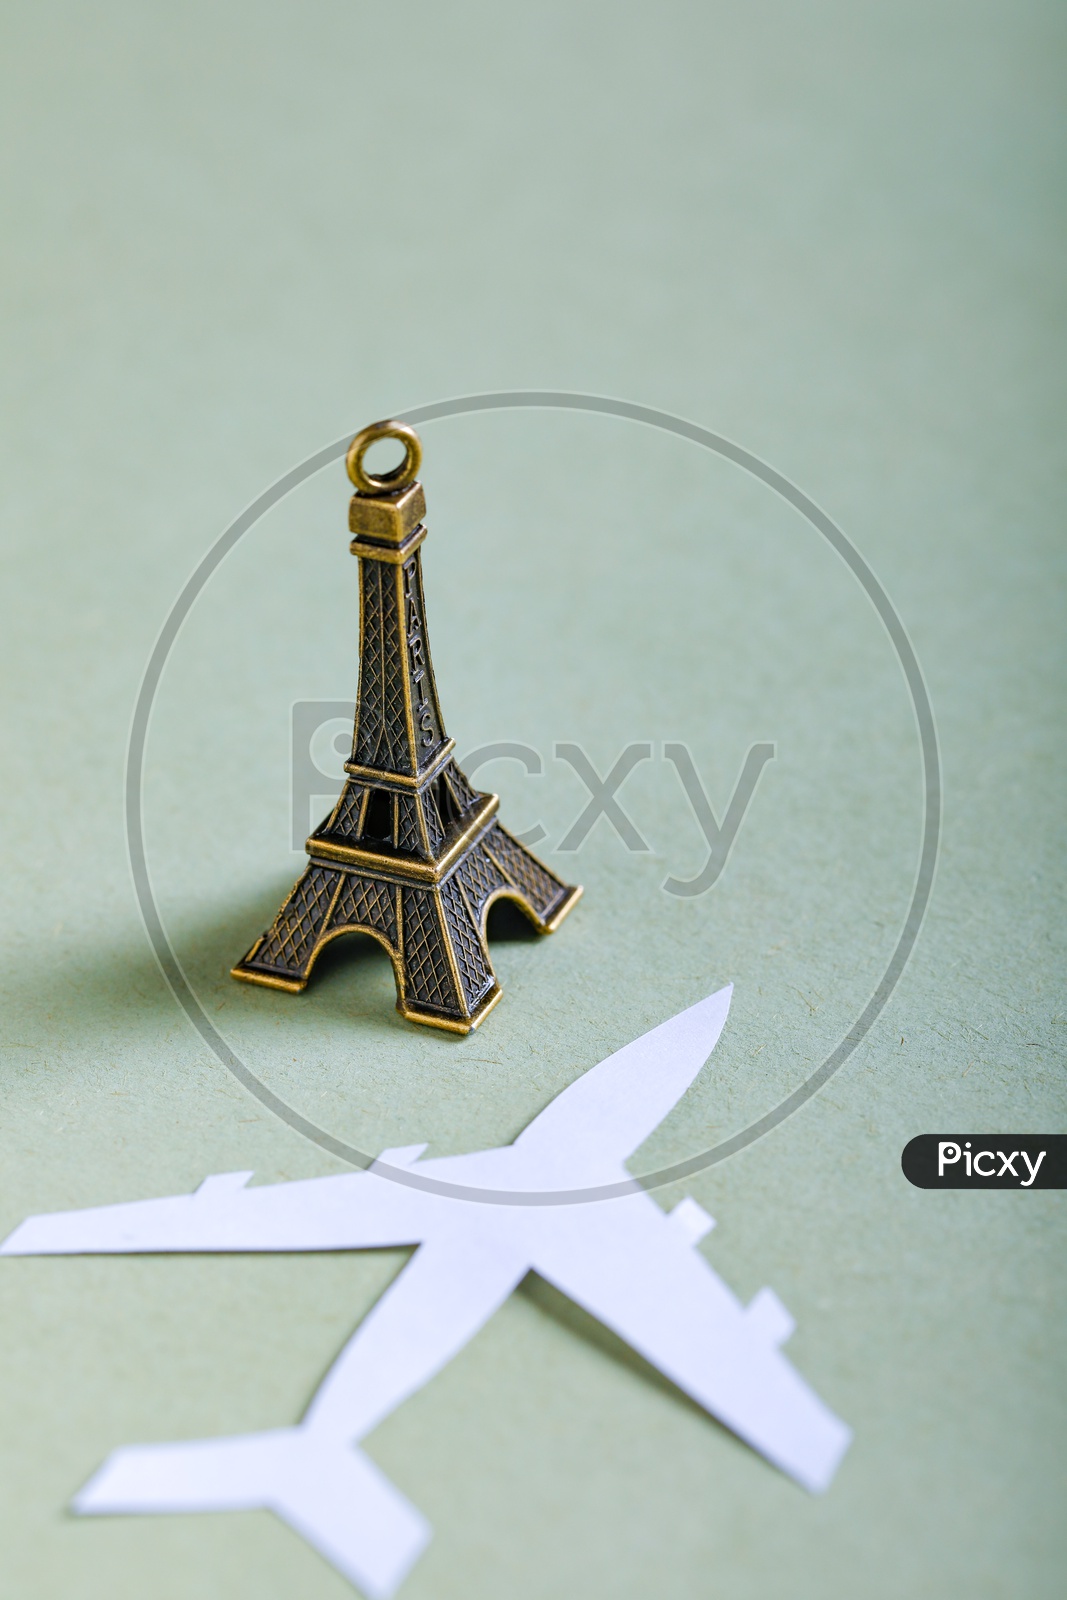 Travel Concept   Paper Airplane and Eiffel Tower Miniature